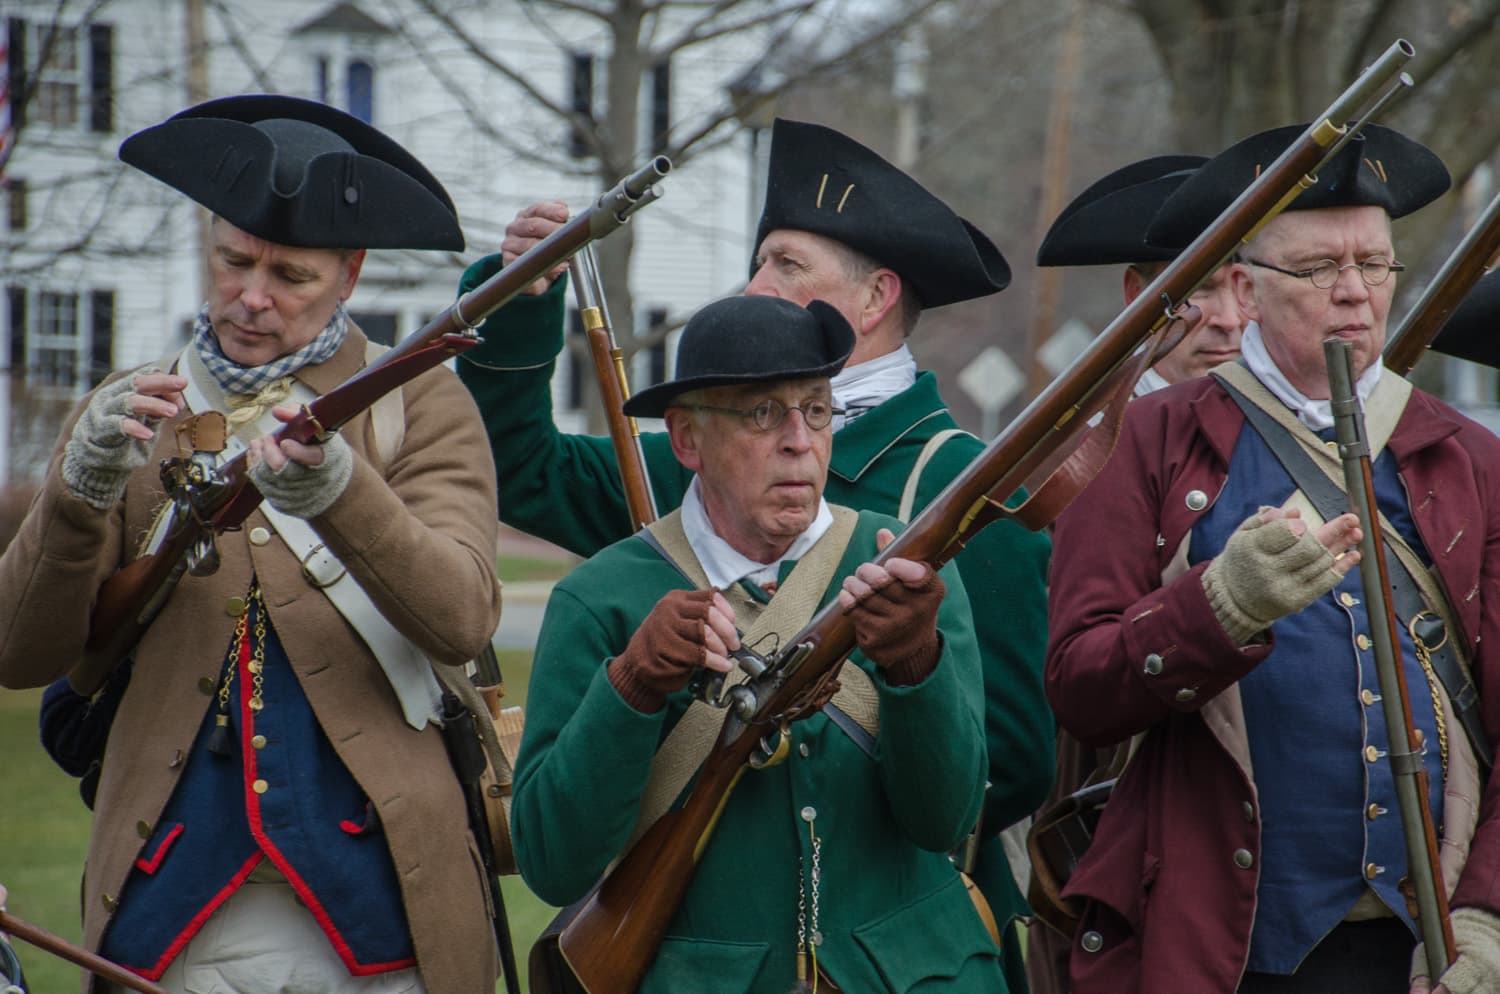 Musket safety is a major focus of the Minute Men's drills. (Sharon Brody/WBUR)